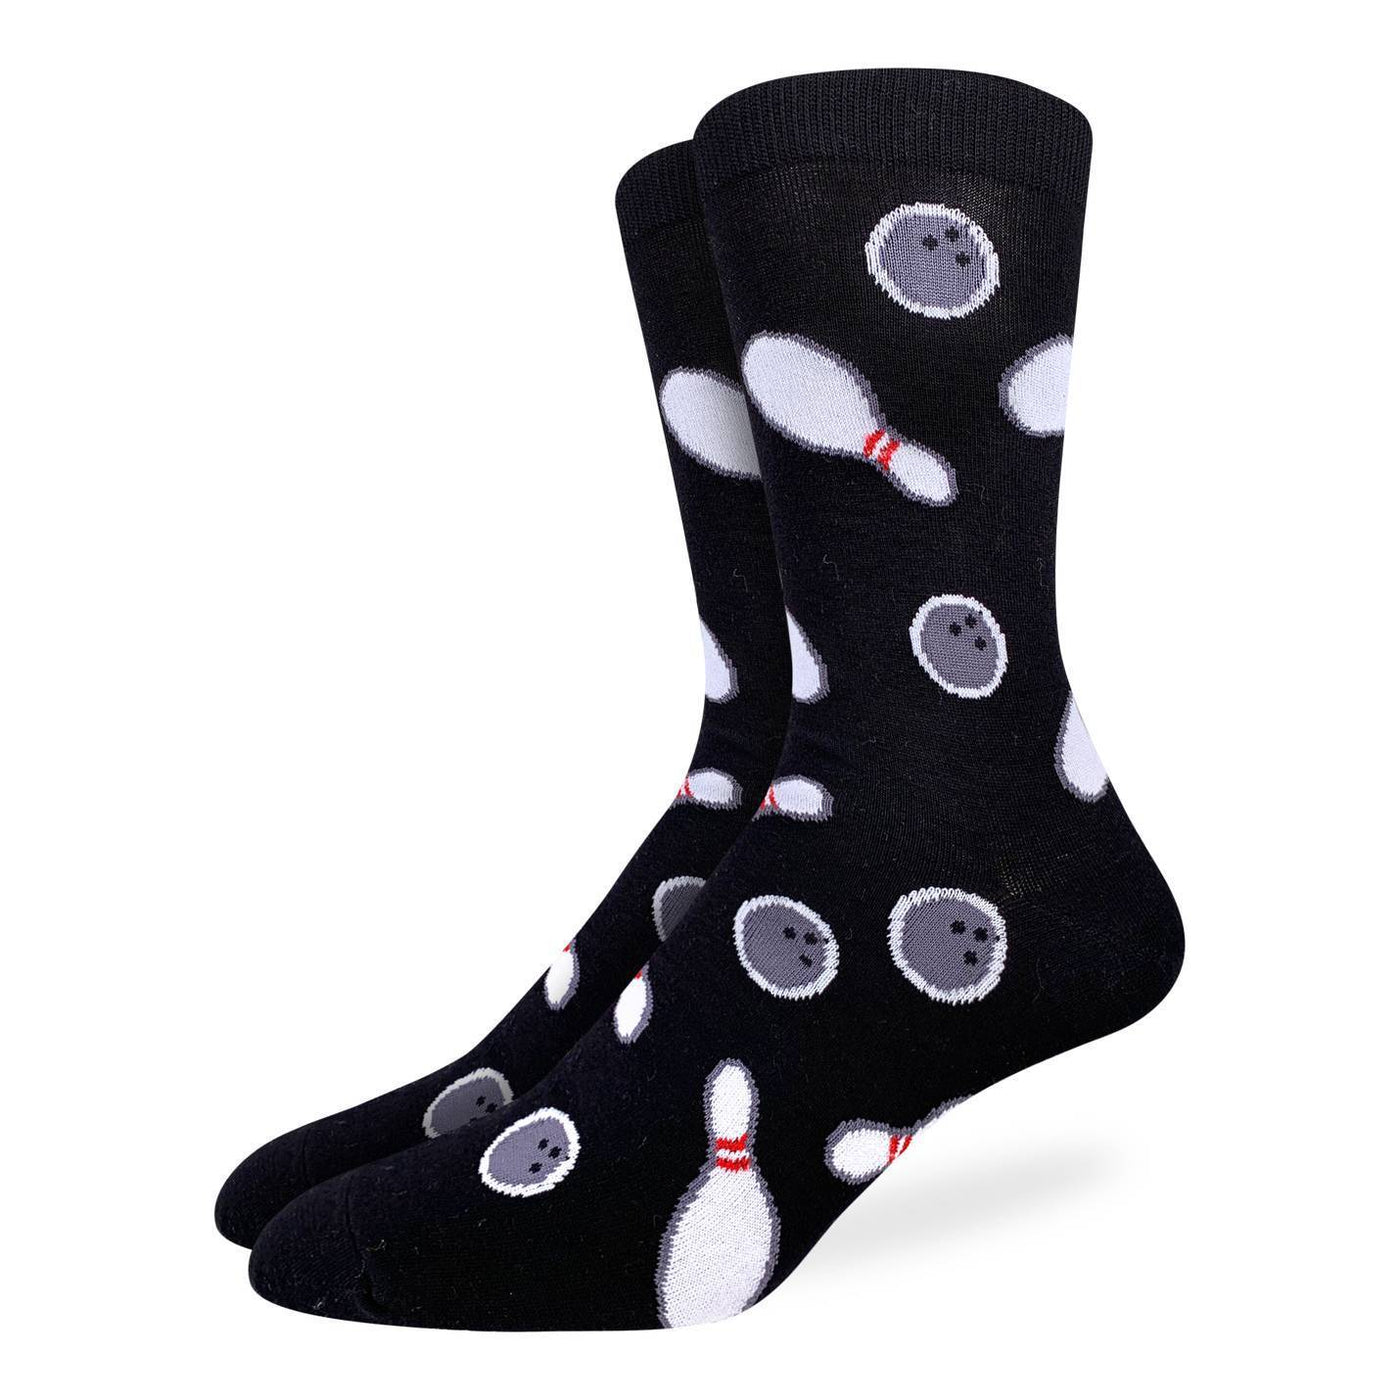 "Bowling" Cotton Crew Socks by Good Luck Sock - SALE